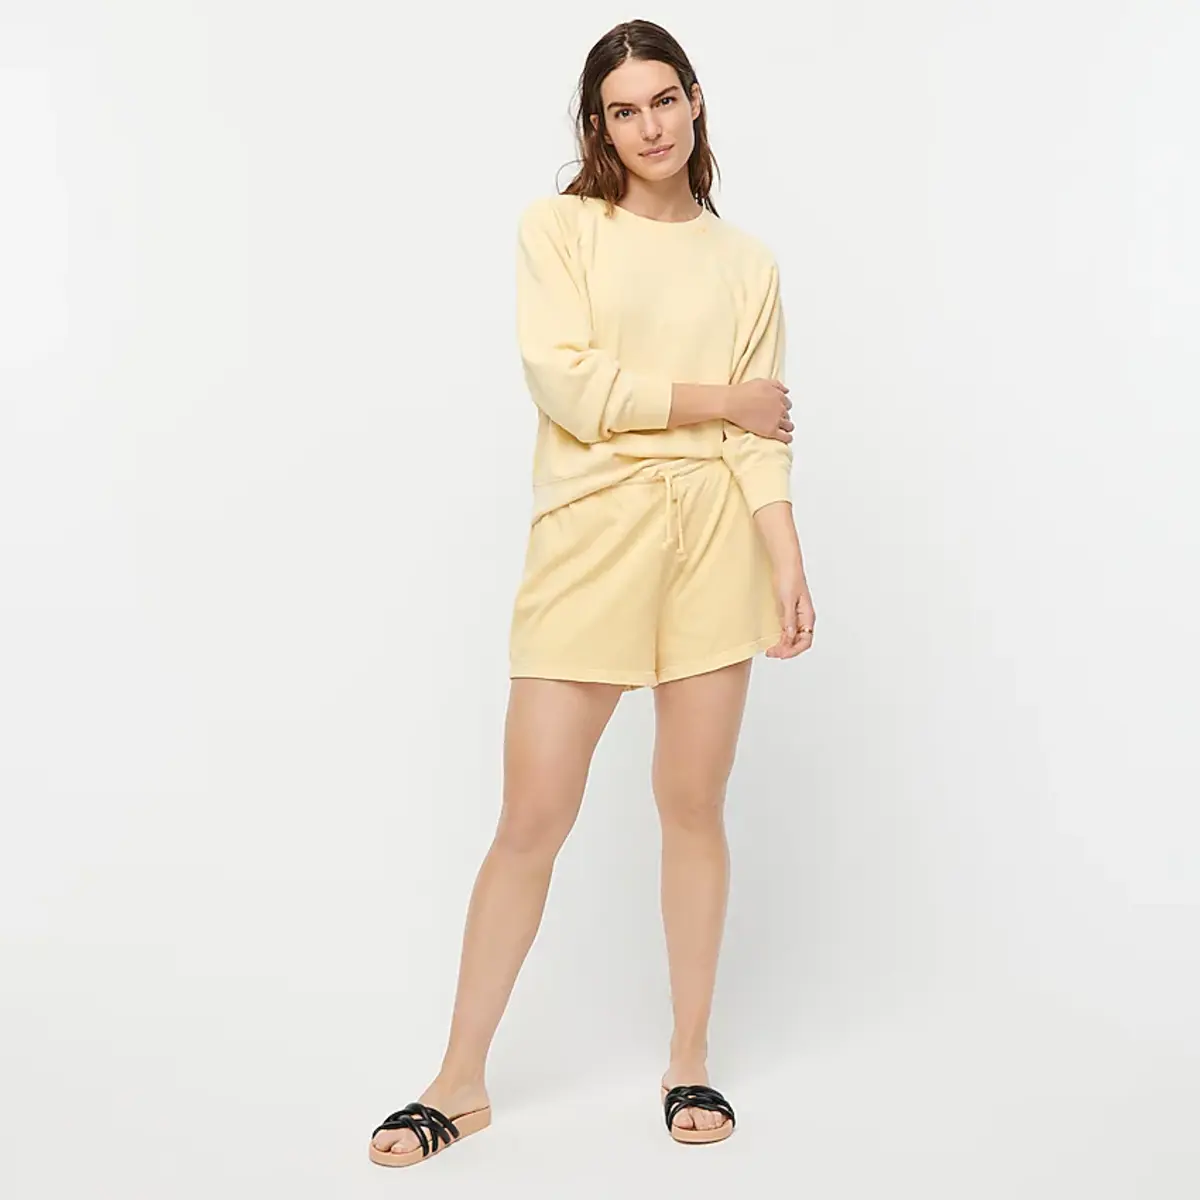 Drawstring shorts in pale yellow by J.Crew